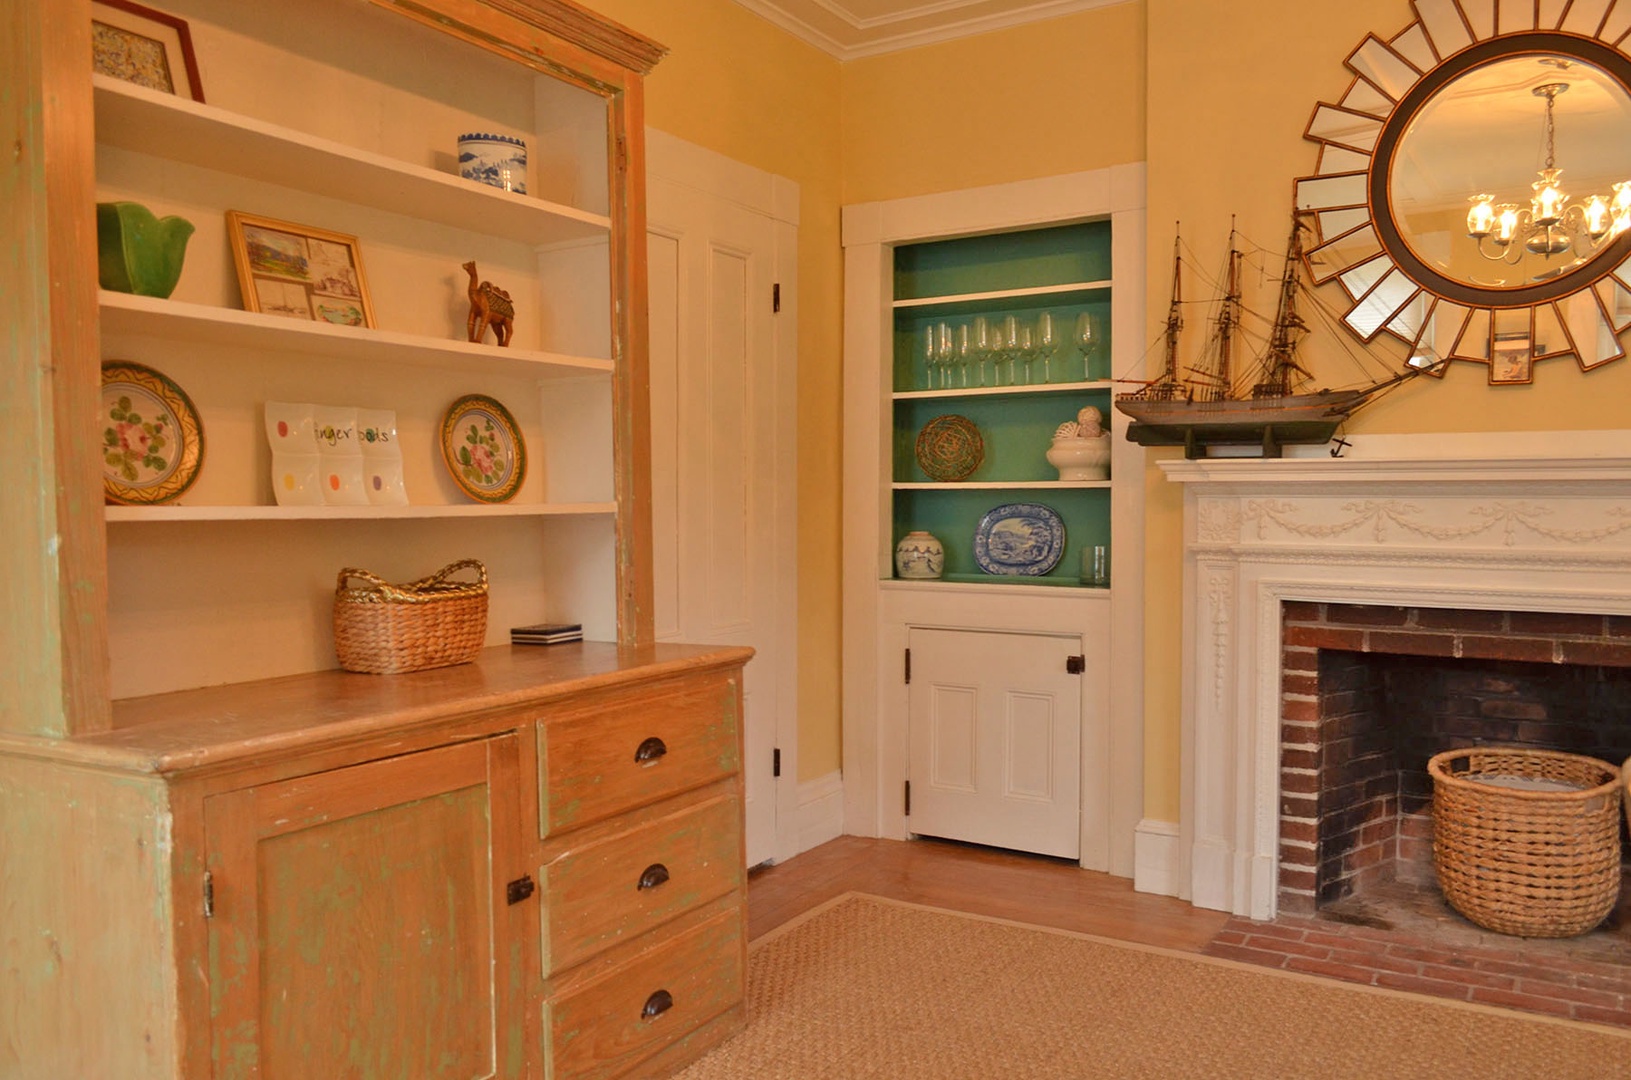 Historic architecture meets new: a beautiful built-in cabinet and a stand alone hutch.